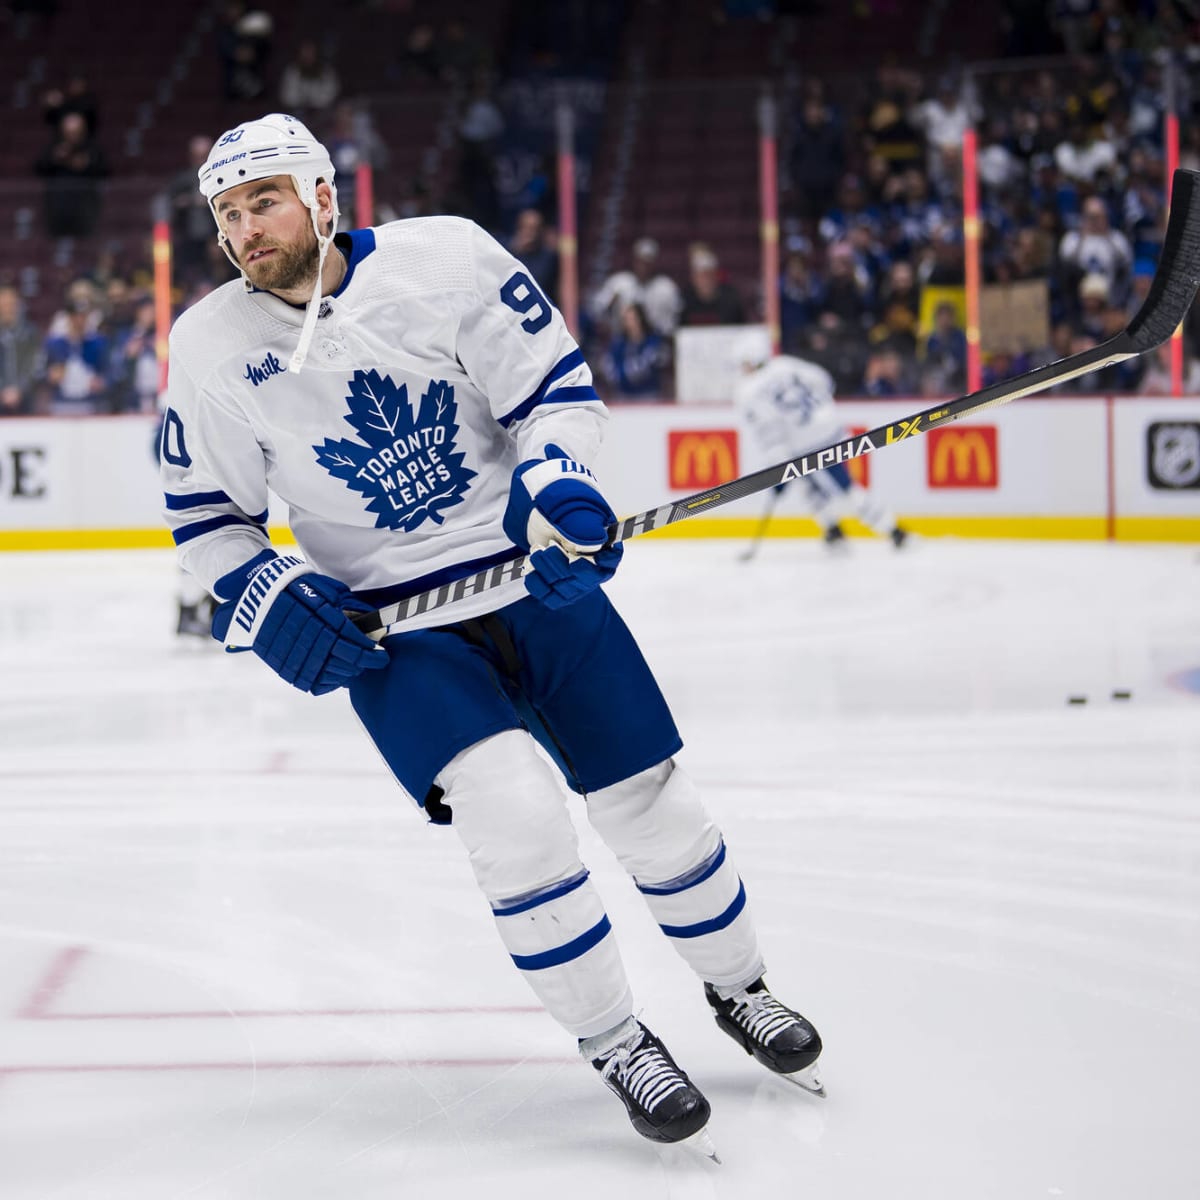 Toronto Maple Leafs: What is going on with John Tavares?